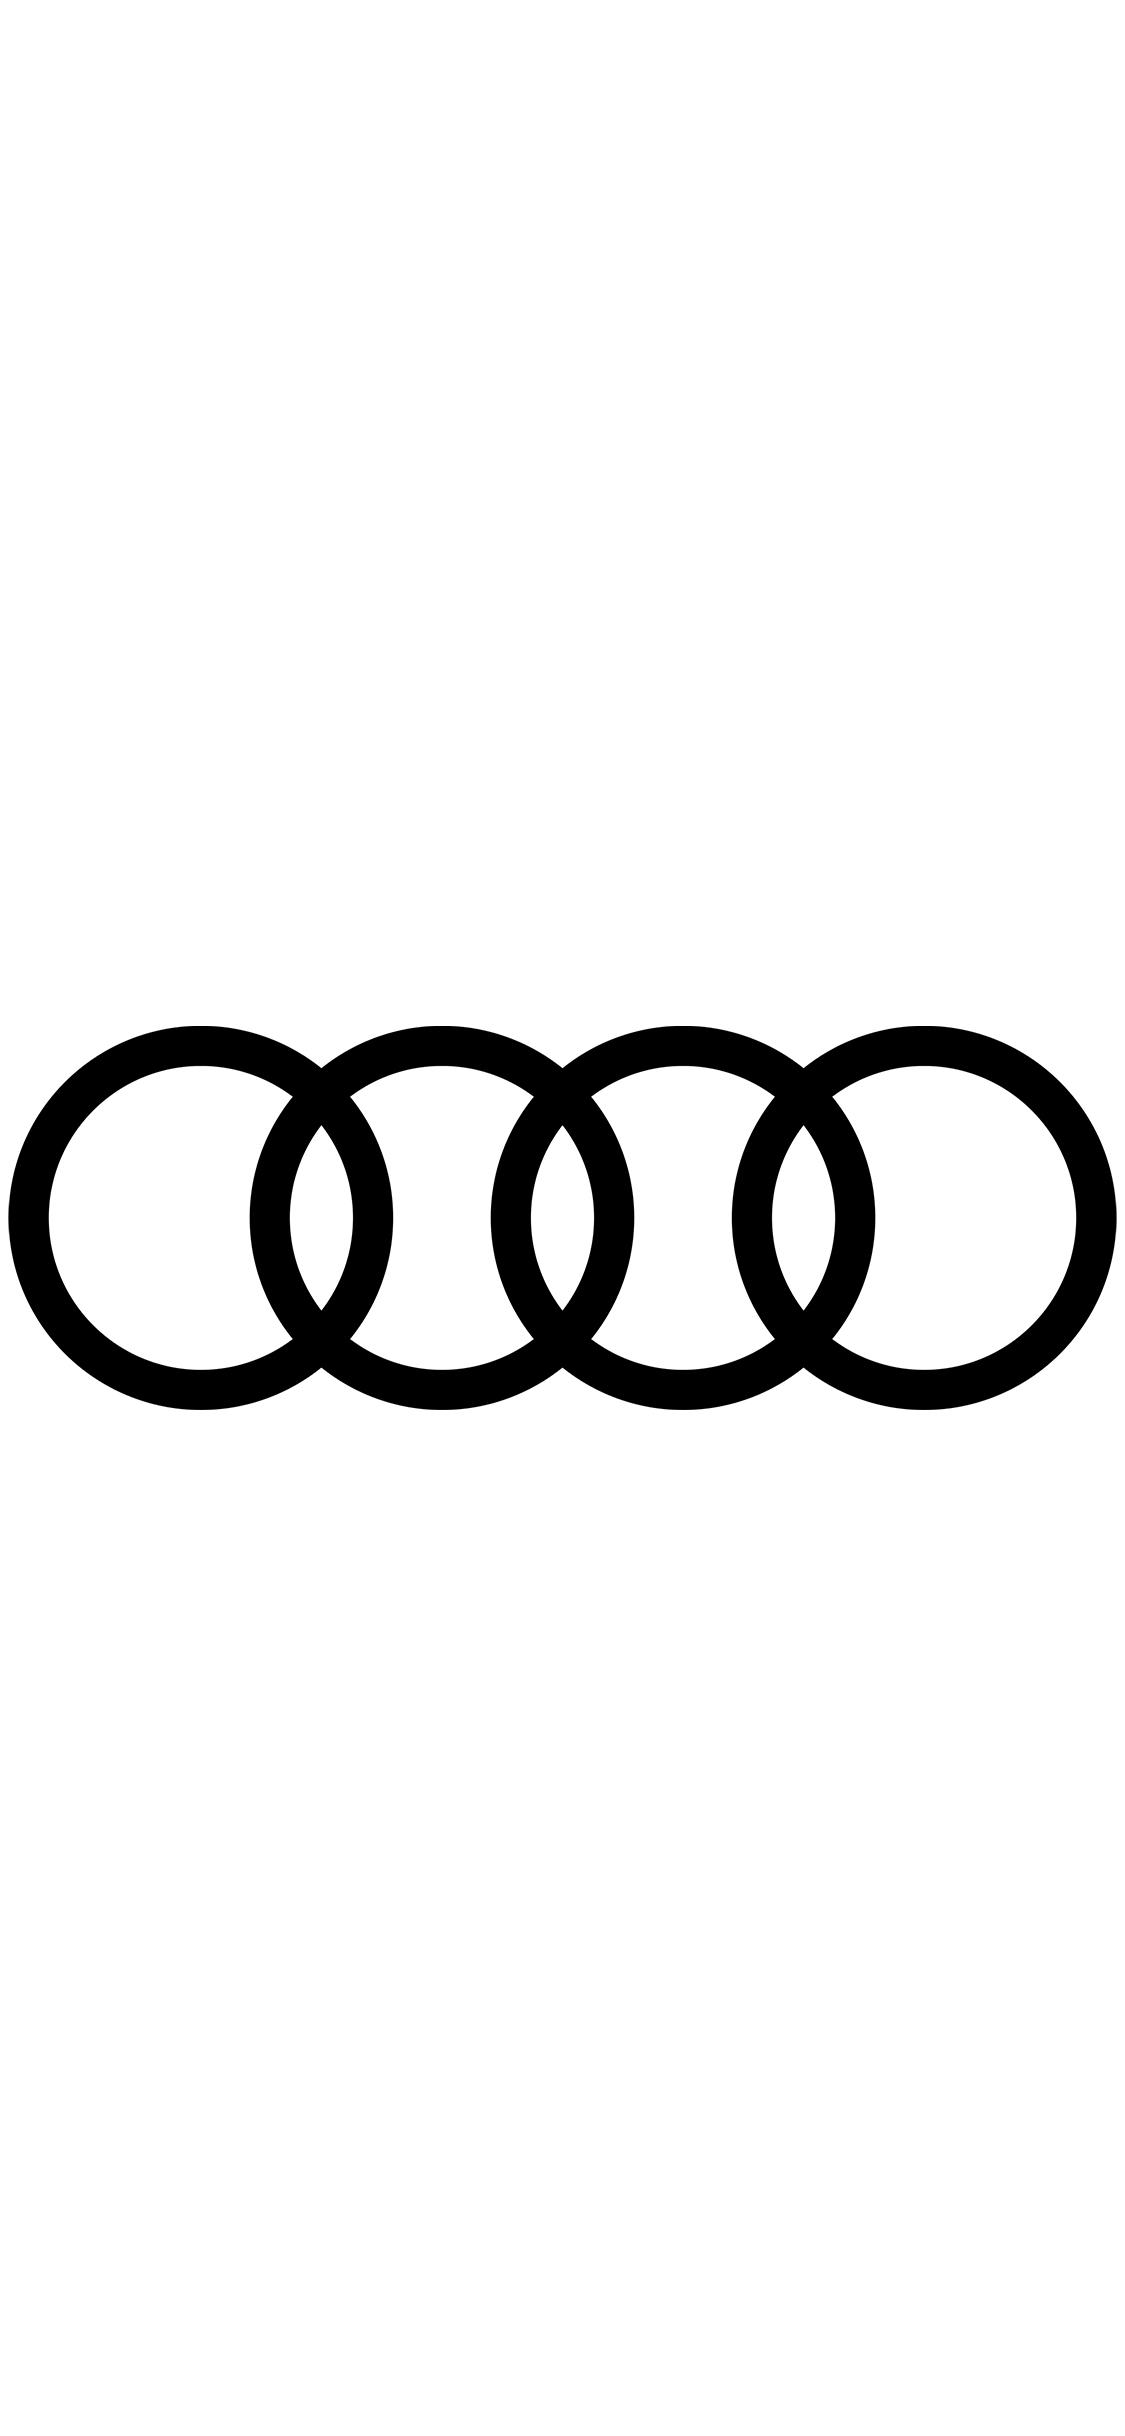 Audi Logo iPhone Wallpaper. Download free image and picture